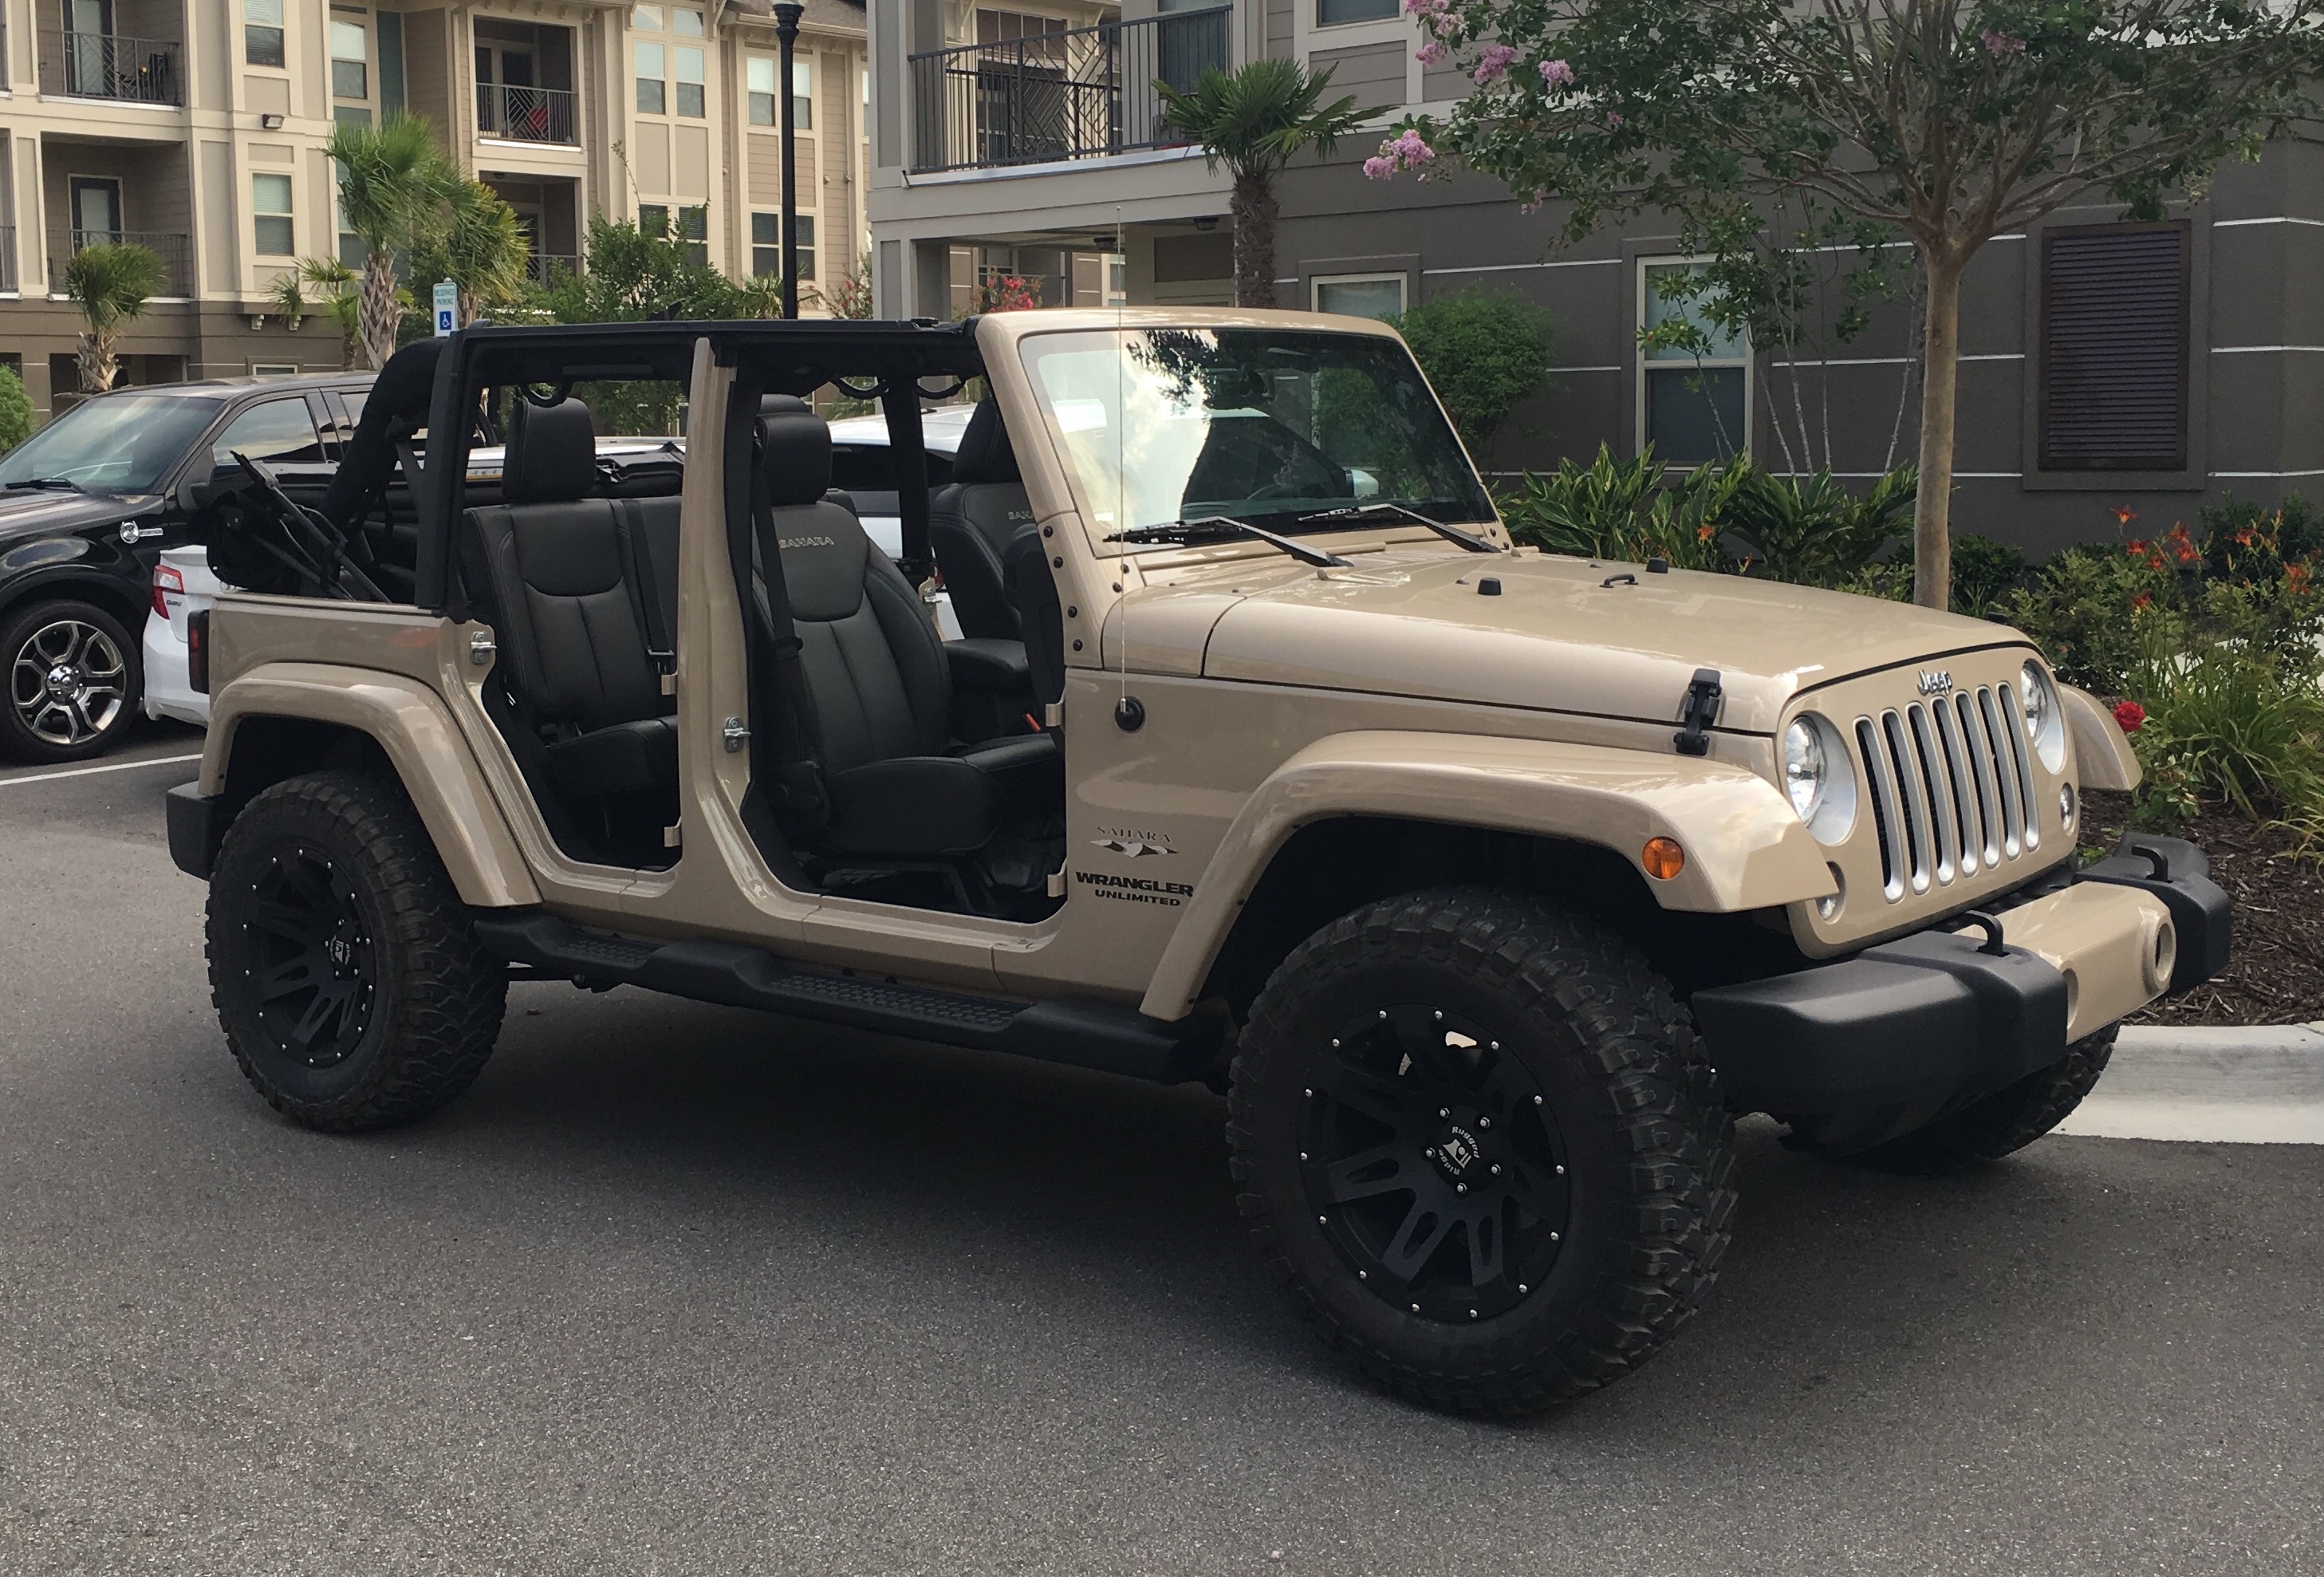 Show Your 2016 Mojave Sand!  - The top destination for Jeep JK  and JL Wrangler news, rumors, and discussion